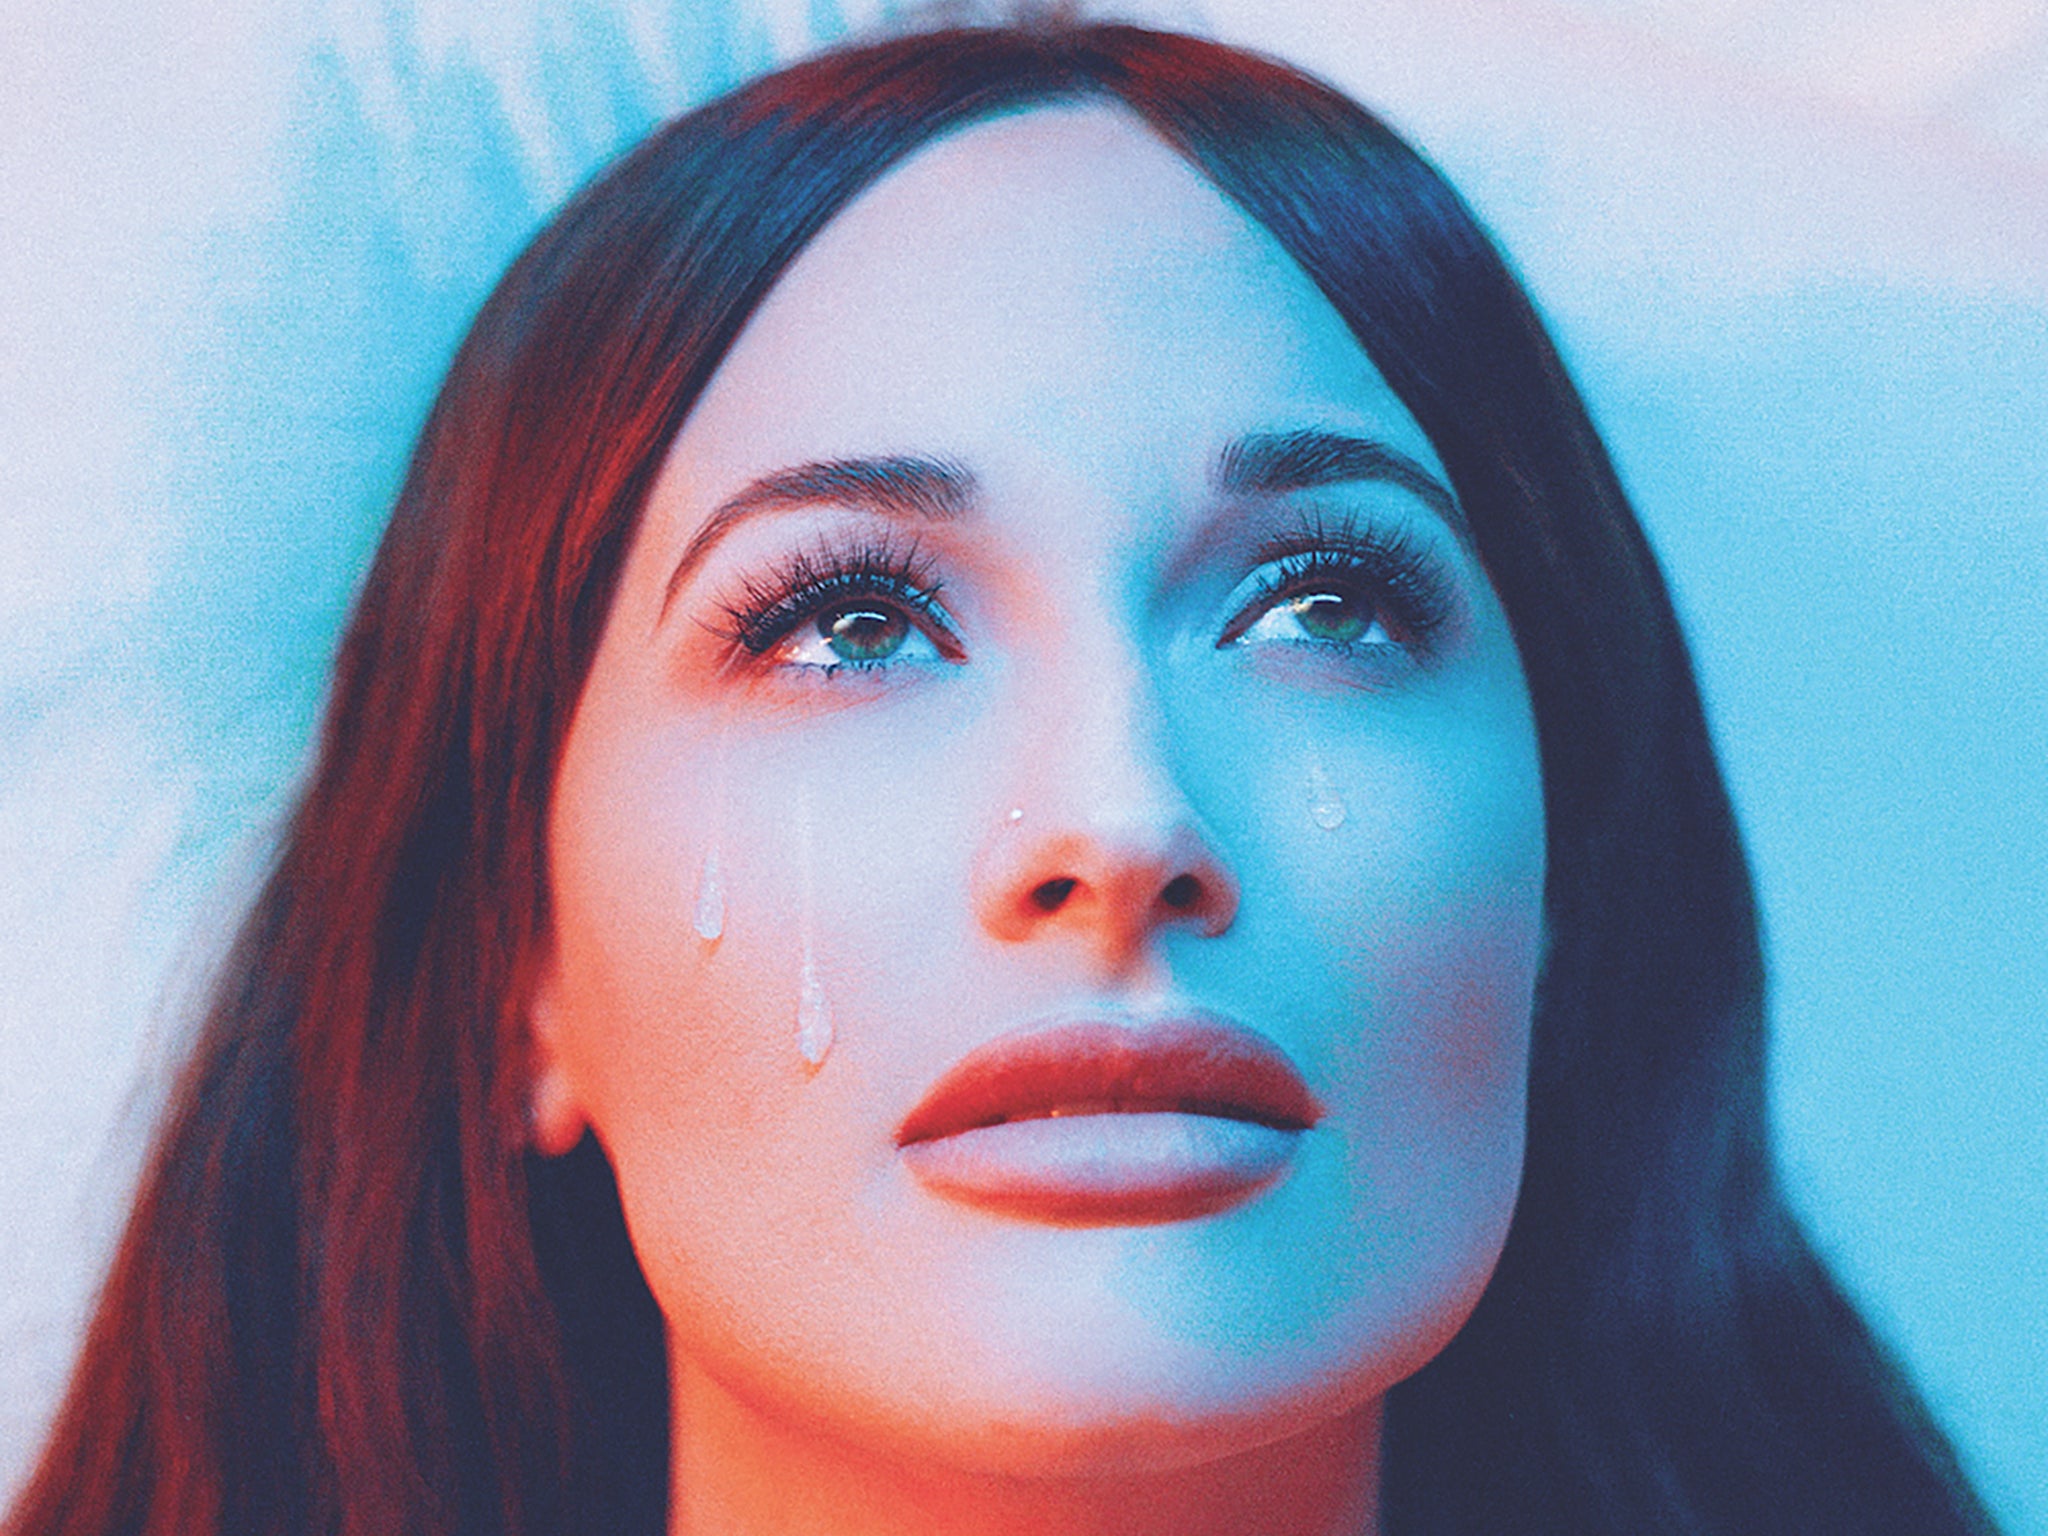 <p>Kacey Musgraves in a promo shot for her new album ‘Star-Crossed'</p>